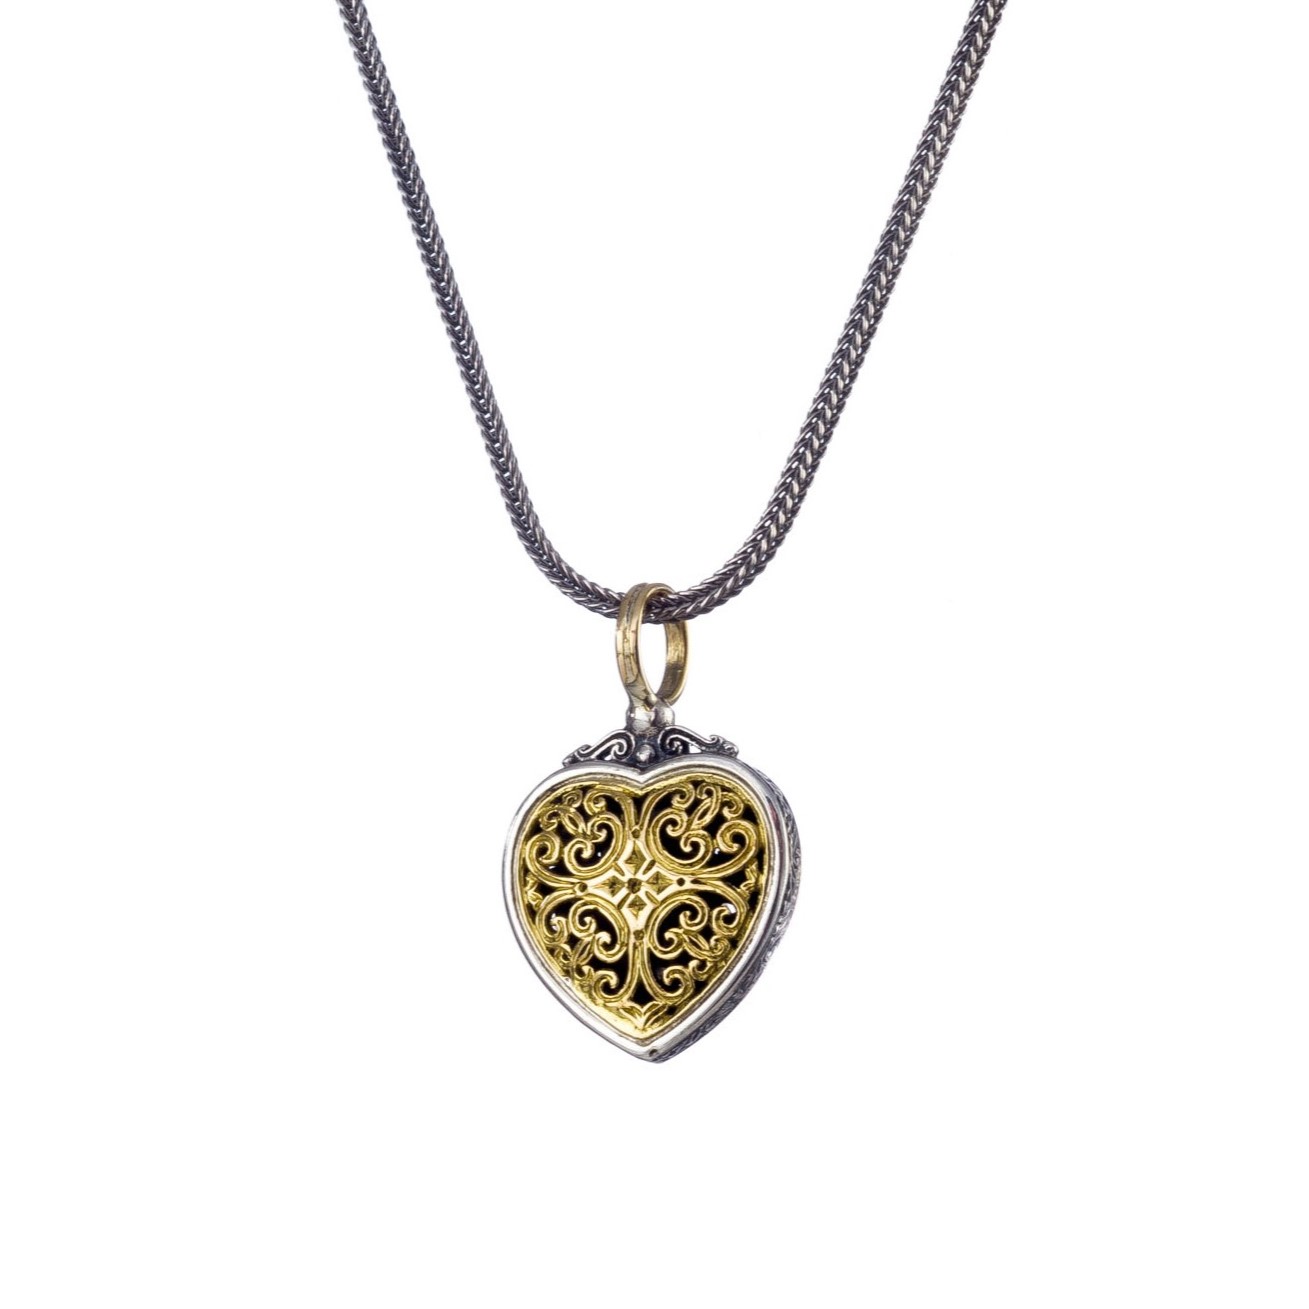 Mediterranean heart pendant in 18K Gold and Sterling silver